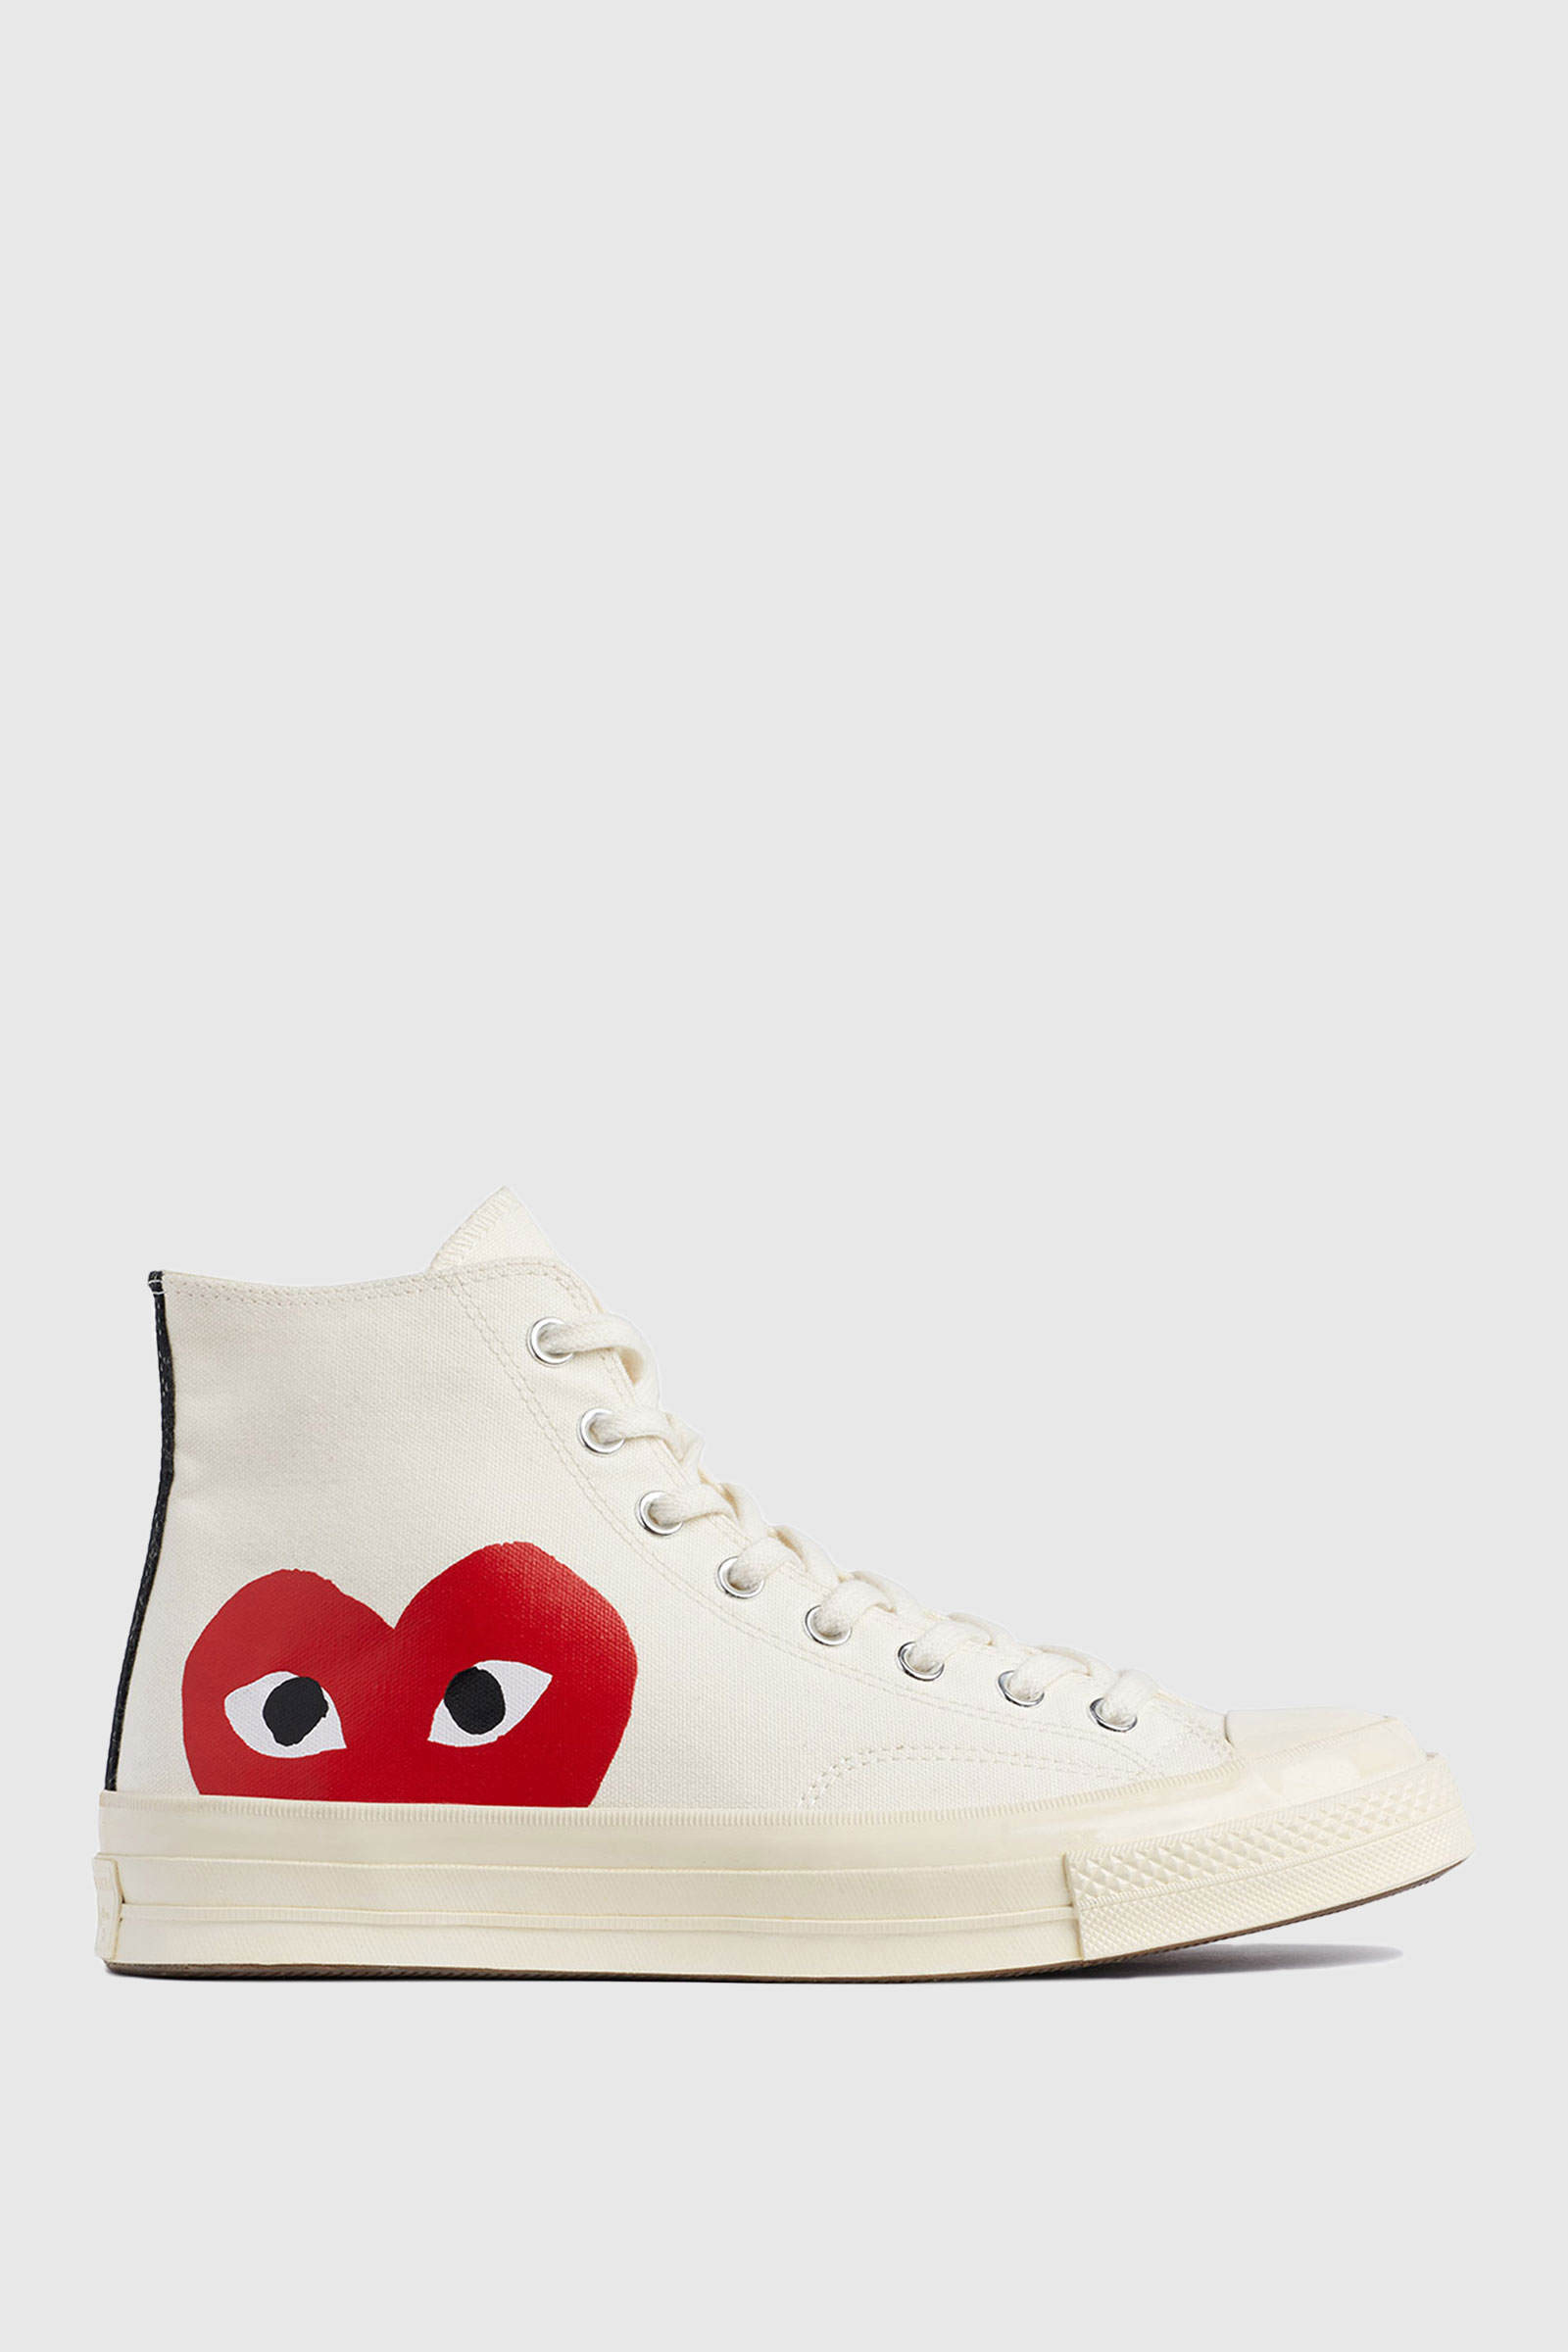 cdg chuck Online Shopping mall | Find 